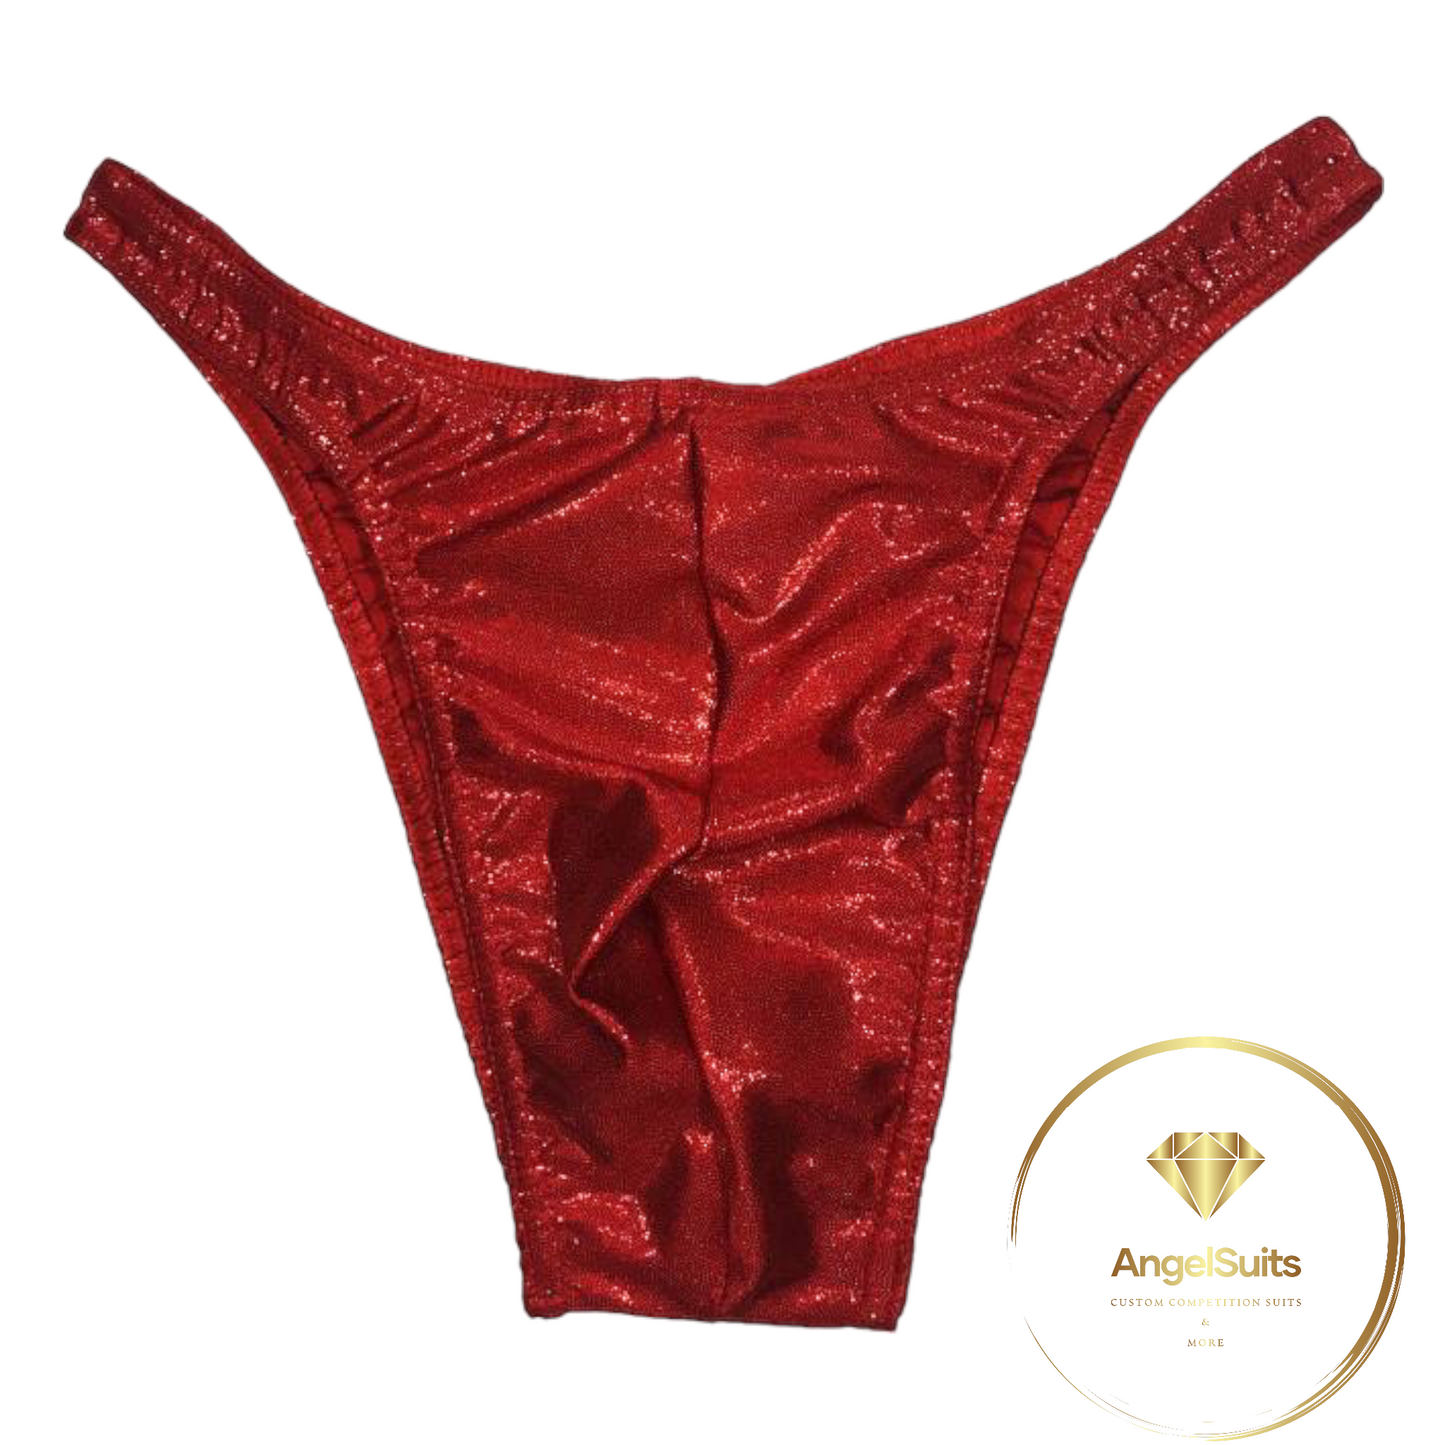 MEN'S CLASSIC BRIEFS WITH GLOSSY RED PLICA